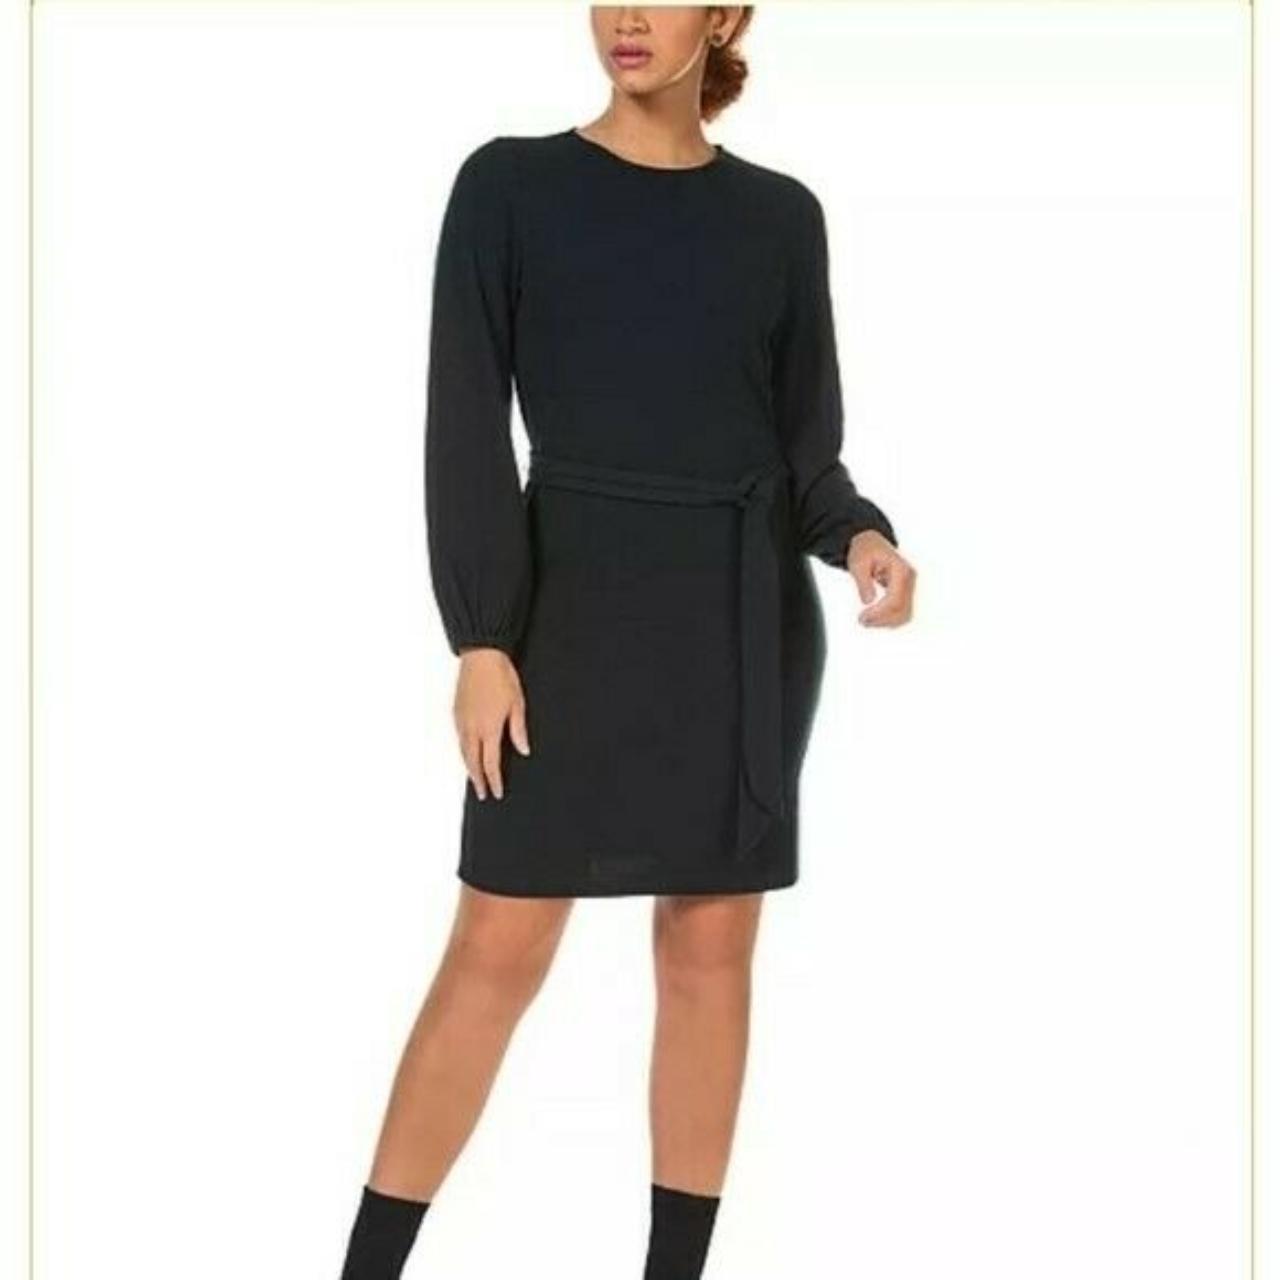 Product Image 1 - Women's Black Tape Fitted Dress.